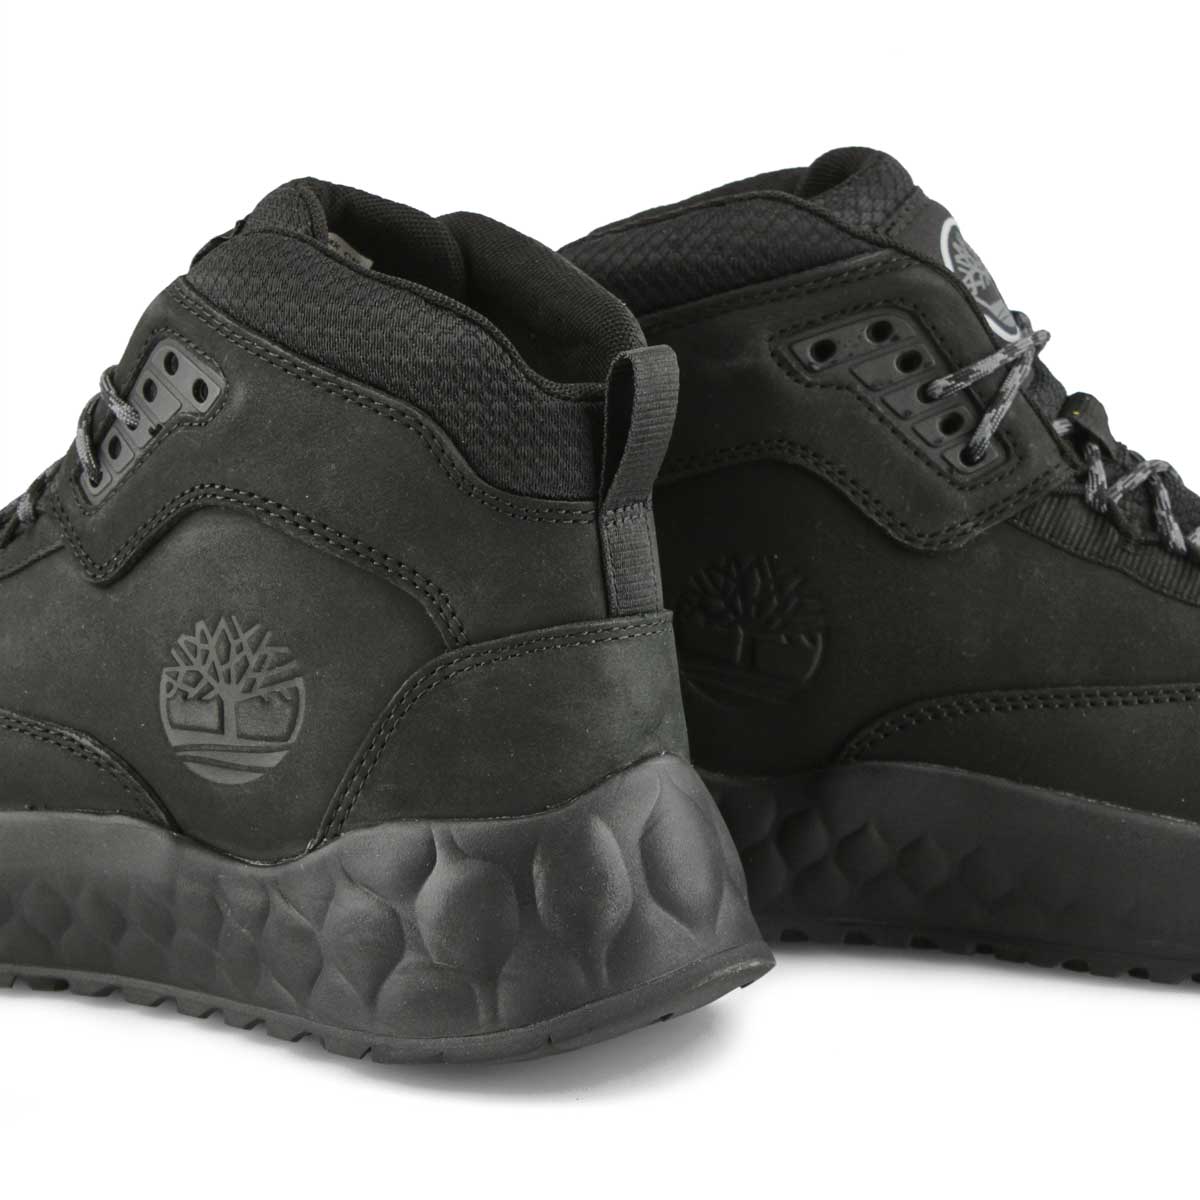 Timberland Men's Solar Wave Mid Ankle Boot - | SoftMoc.com